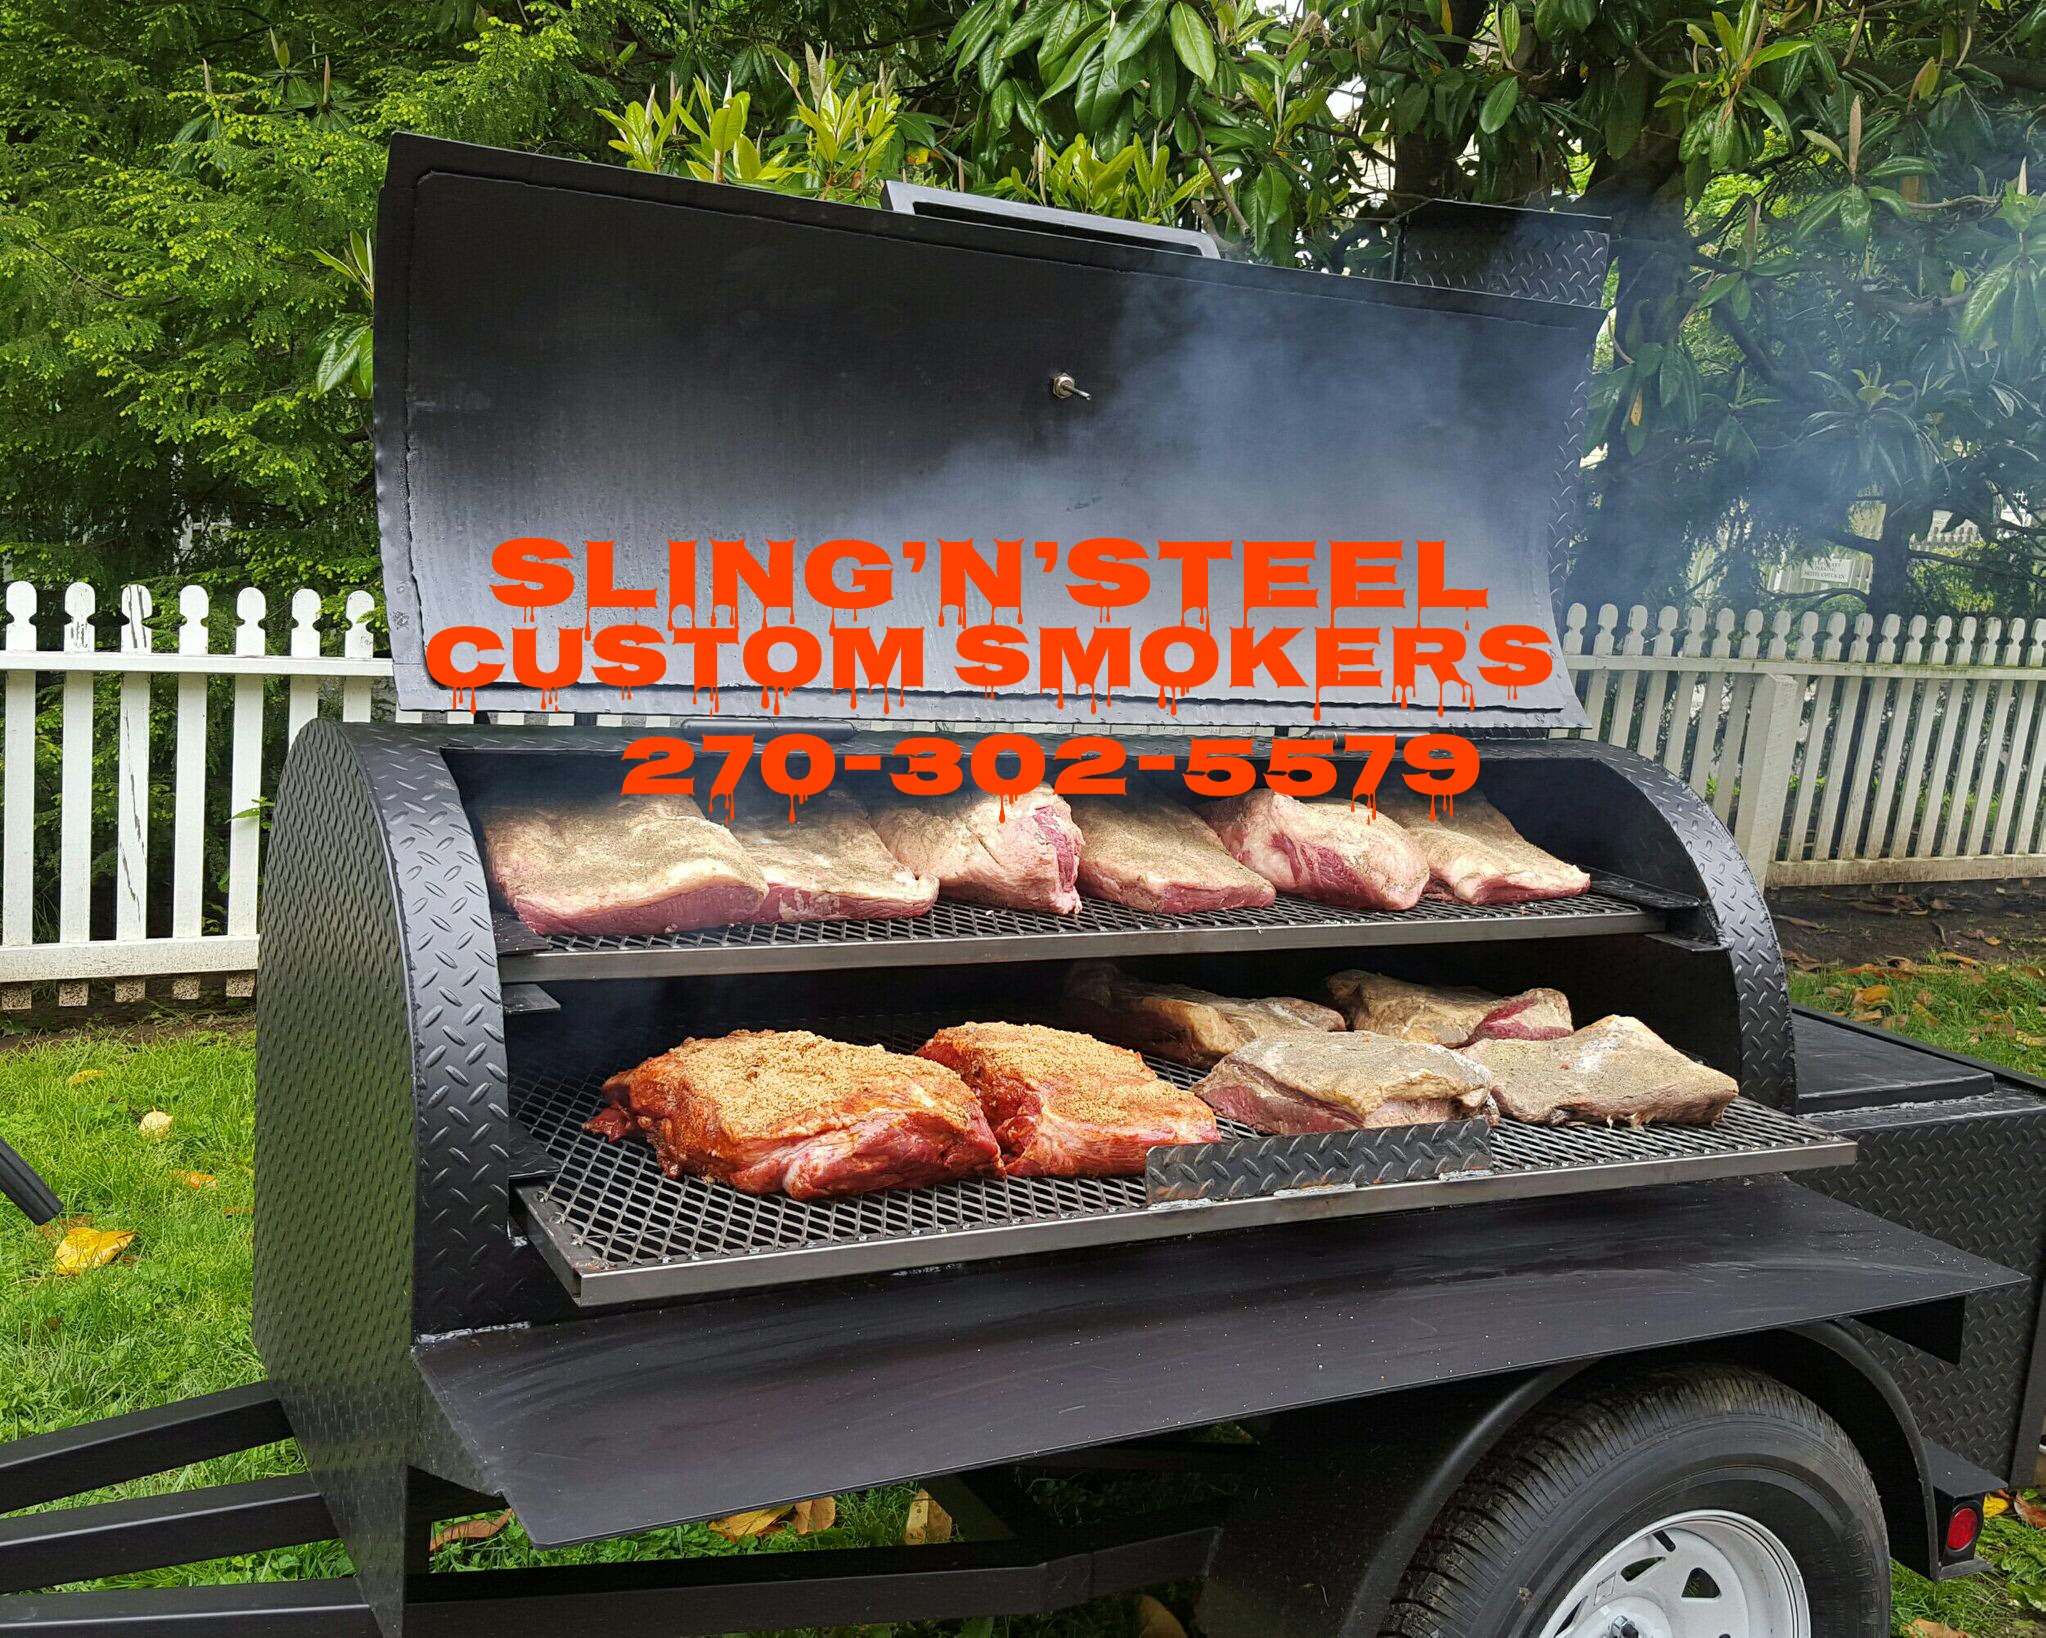 Sling 'N' Steel Custom Smokers – Founded on a passion for cooking